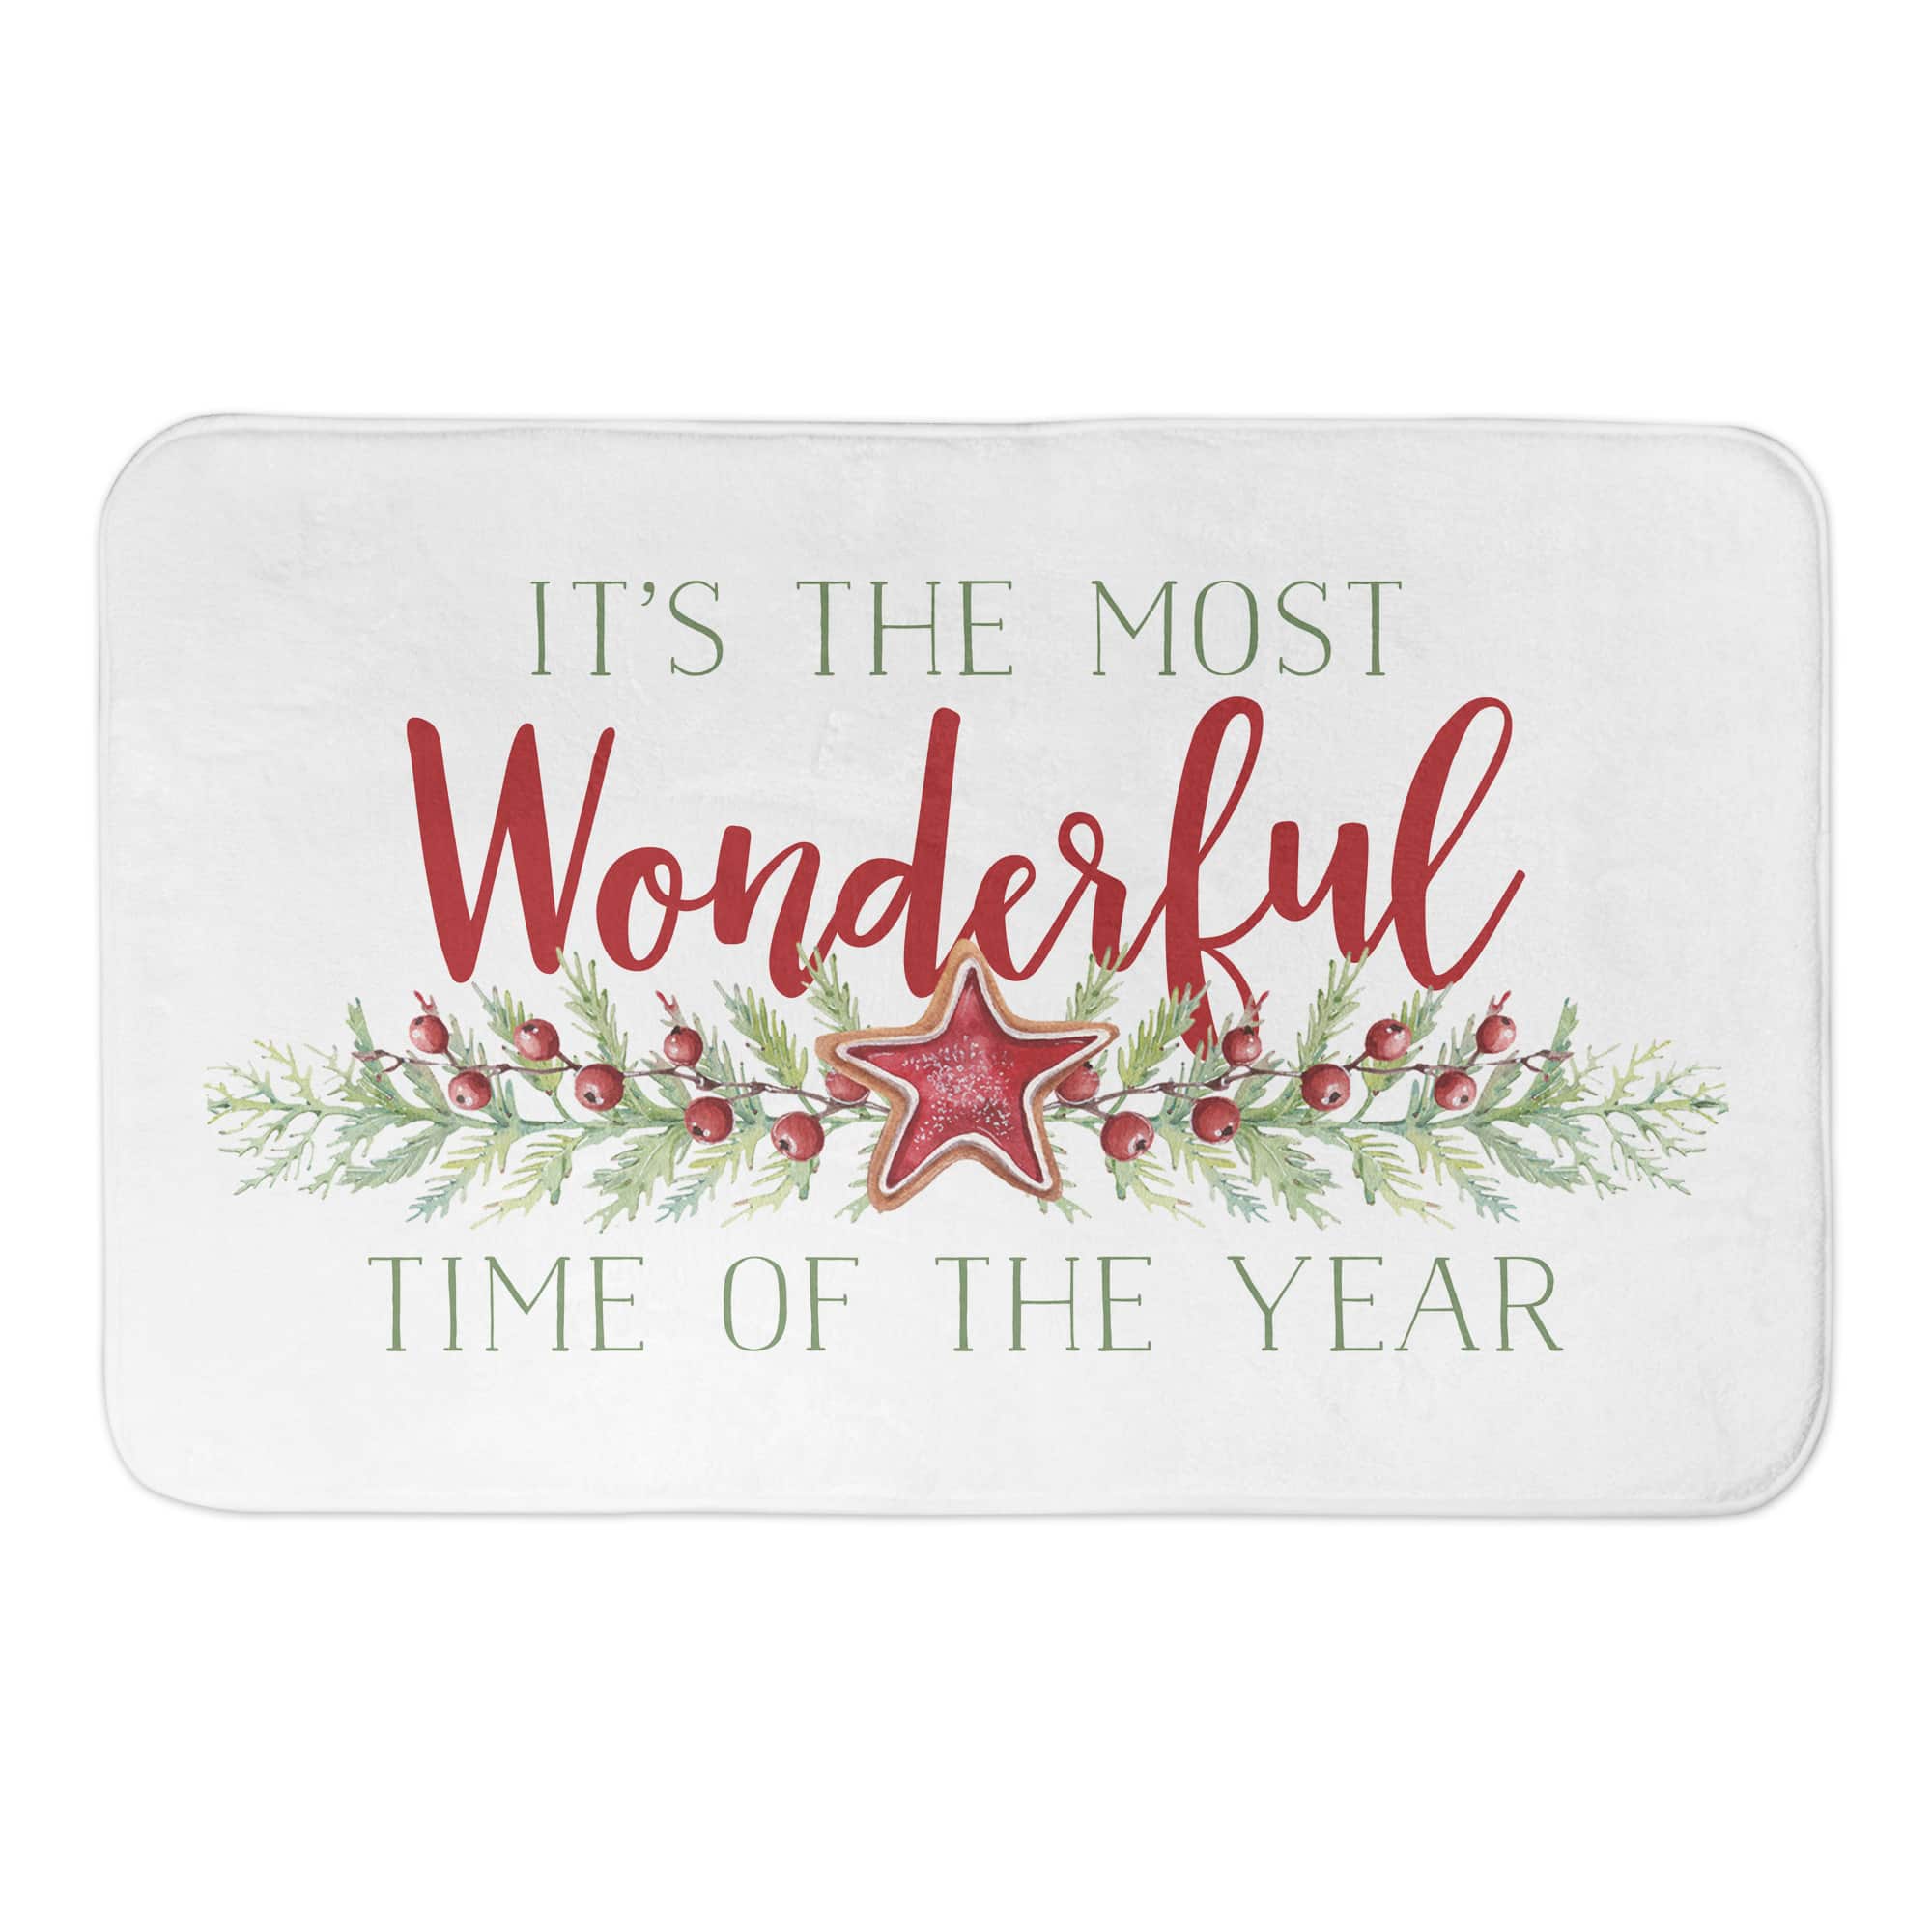 The Most Wonderful Time of the Year Bath Mat